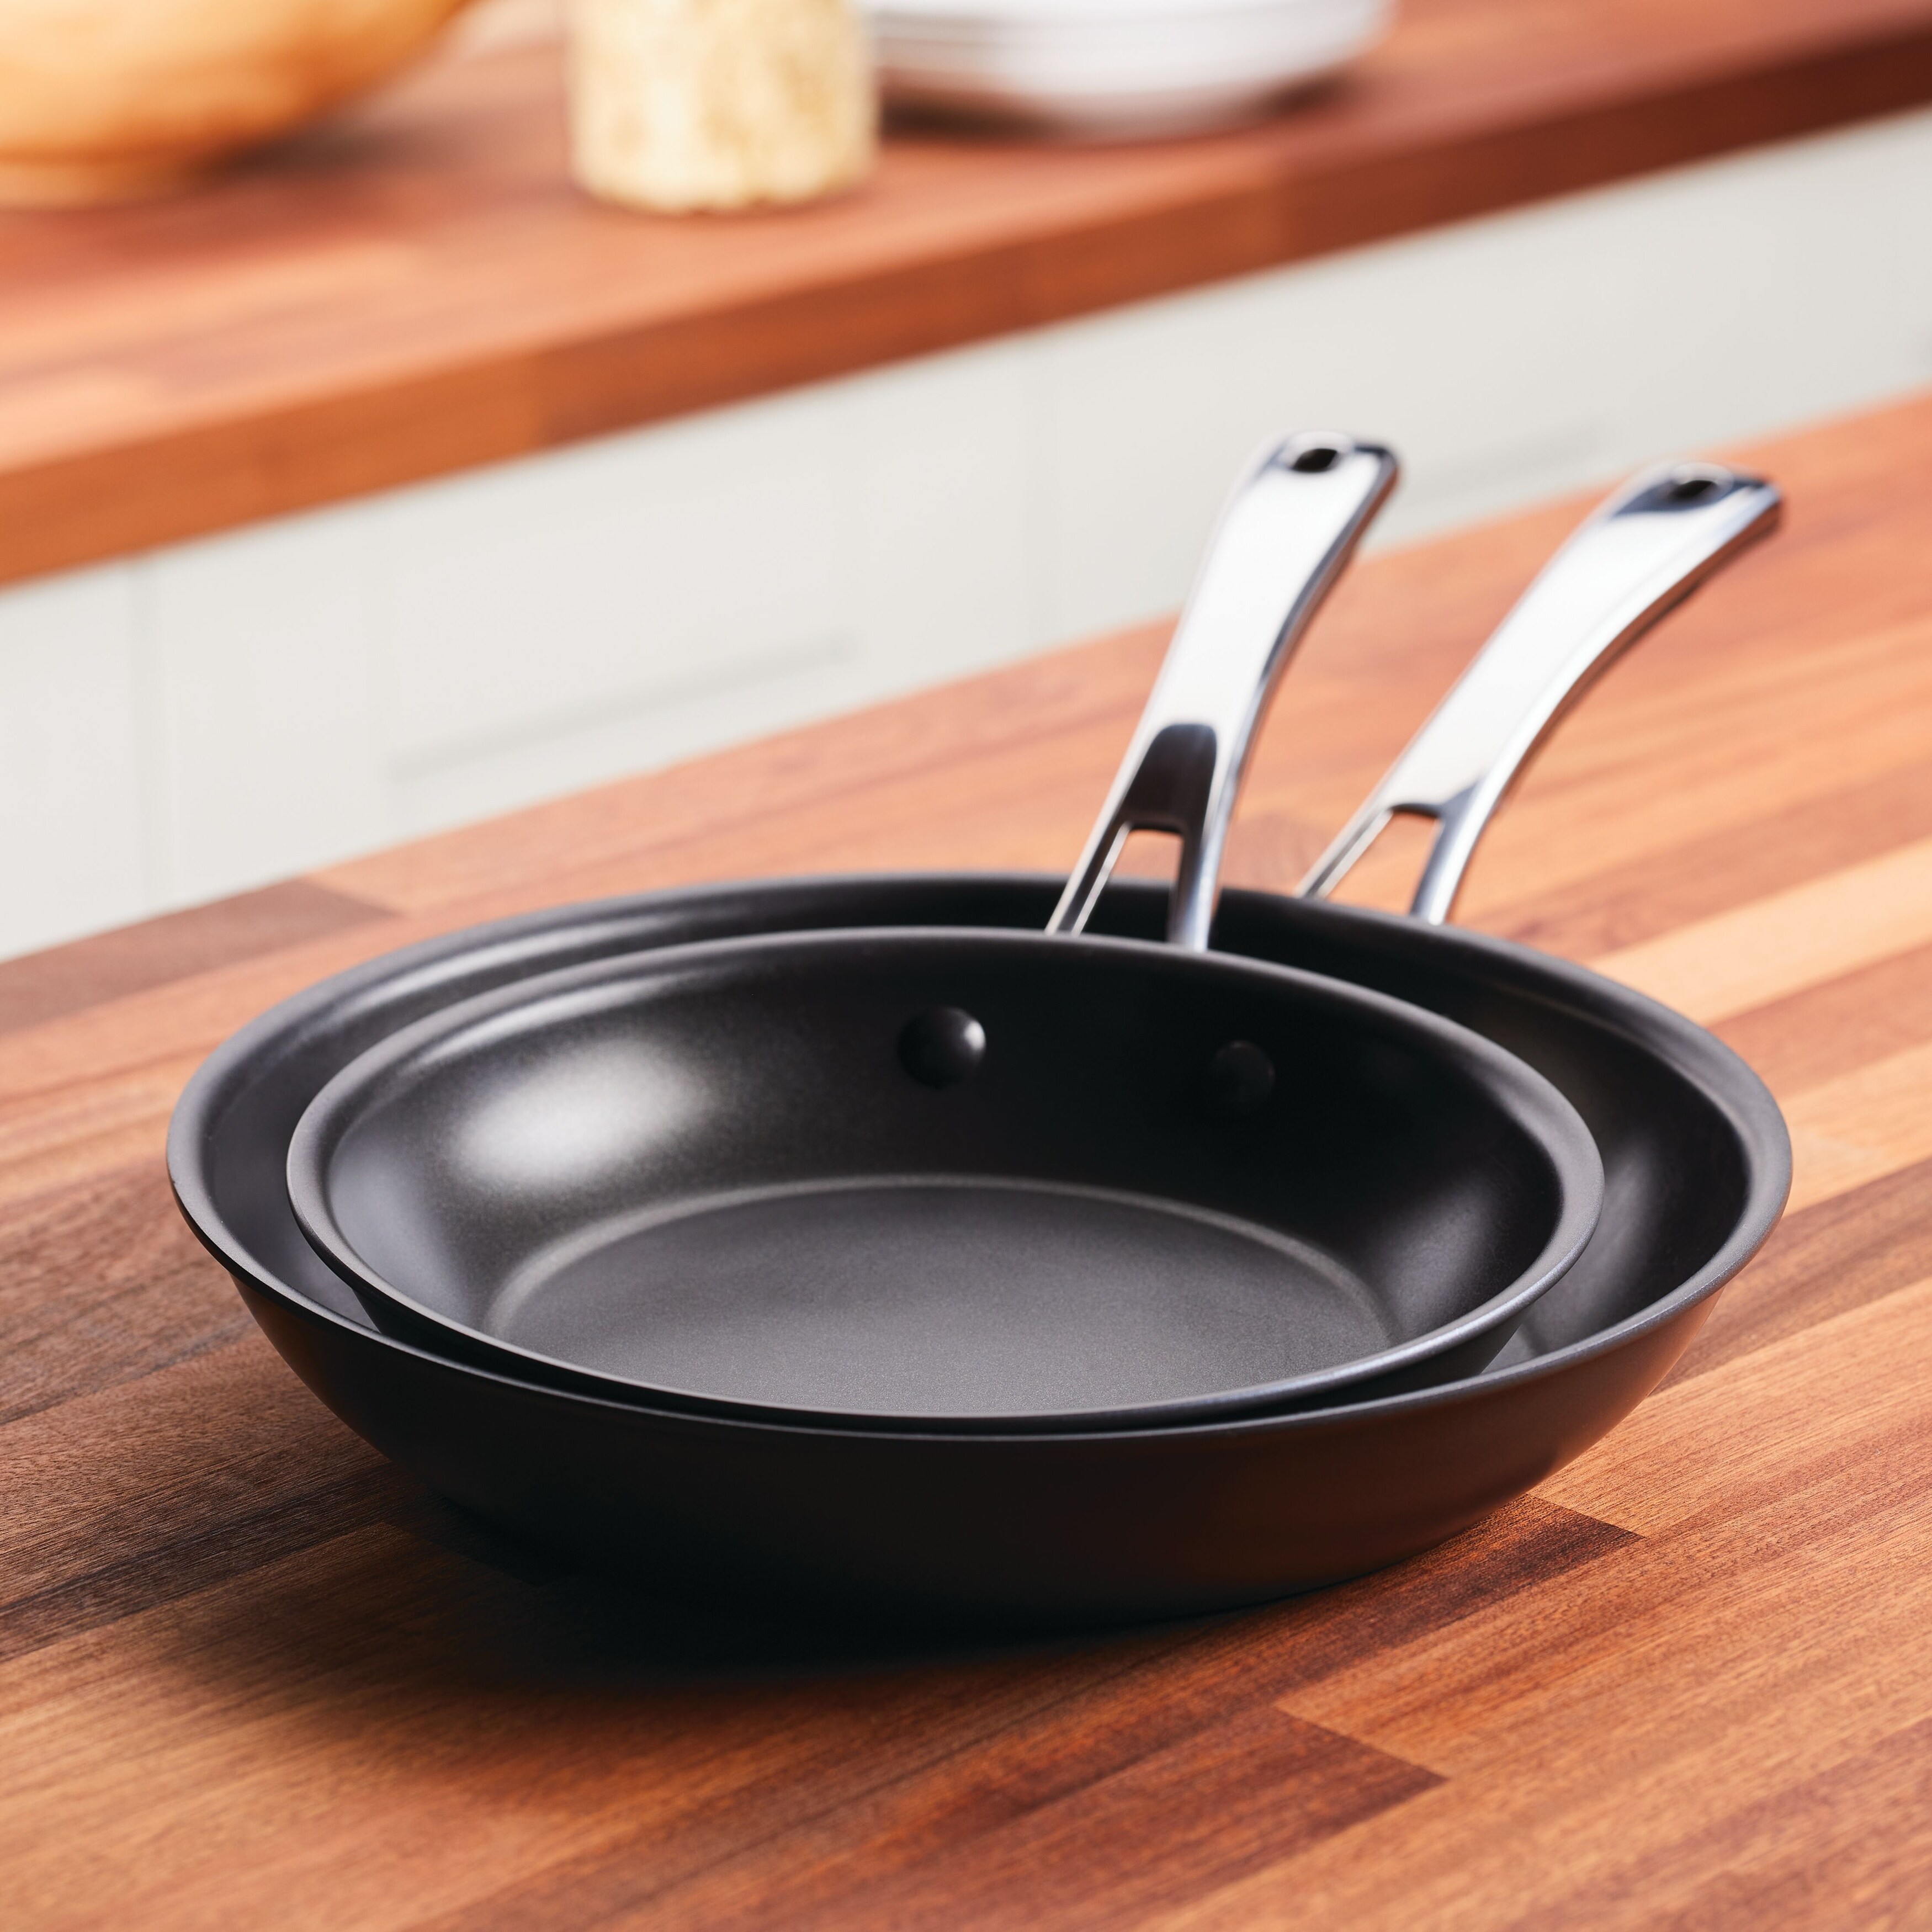 https://ak1.ostkcdn.com/images/products/is/images/direct/7ef8cf93b21039f664dad2dc642e1372a17c1595/Rachael-Ray-Cook-%2B-Create-Hard-Anodized-Nonstick-Frying-Pan-Set%2C-2-Piece%2C-Black.jpg